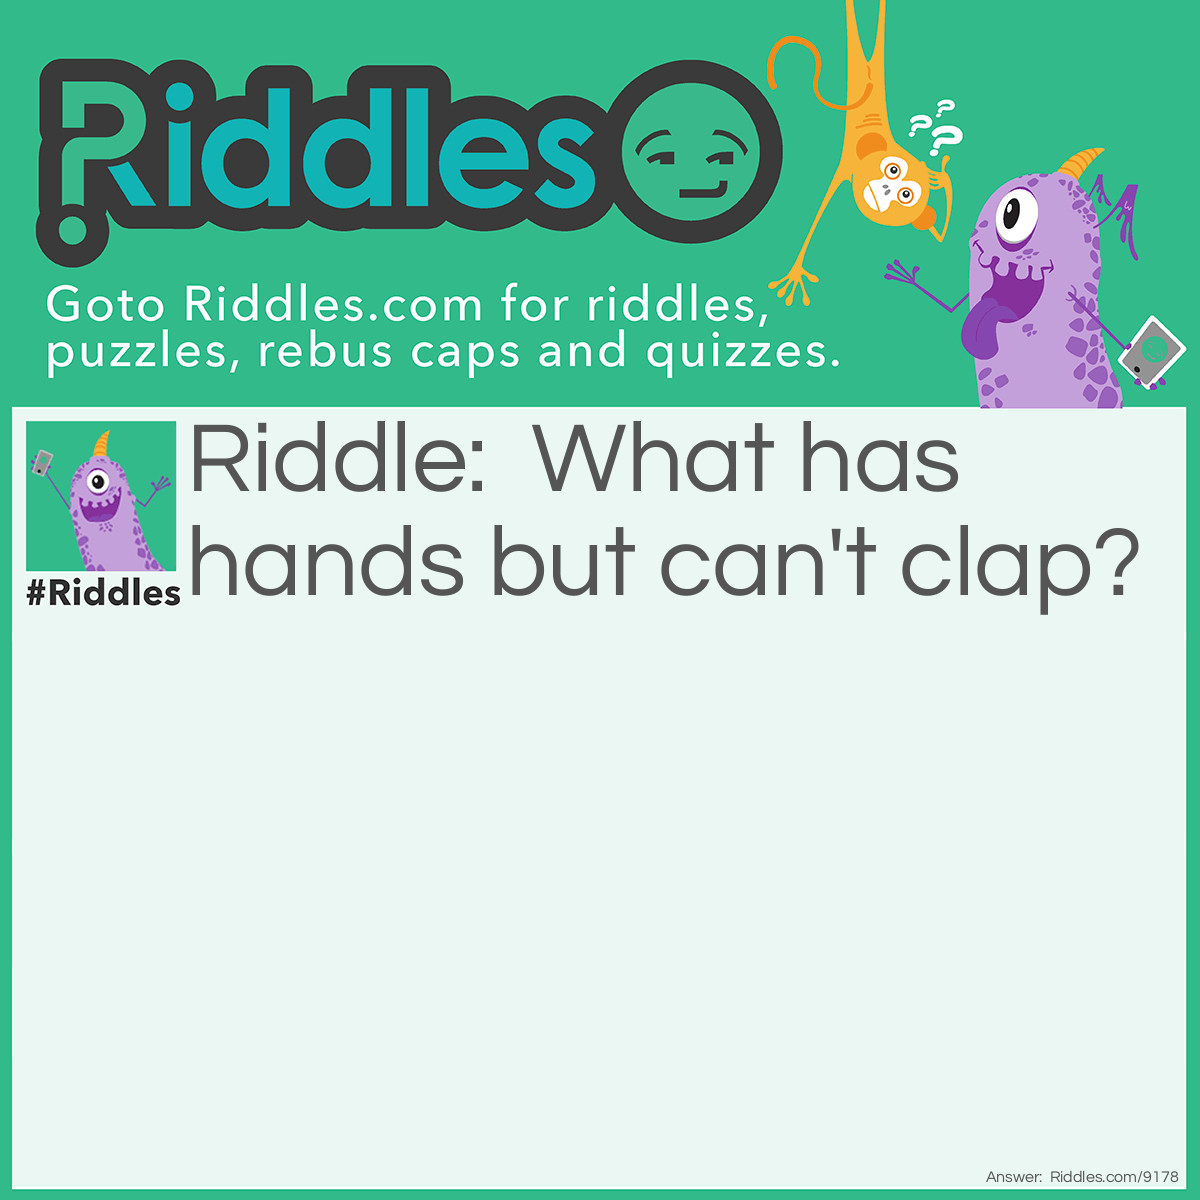 Riddle: What has hands but can't clap? Answer: a Clock